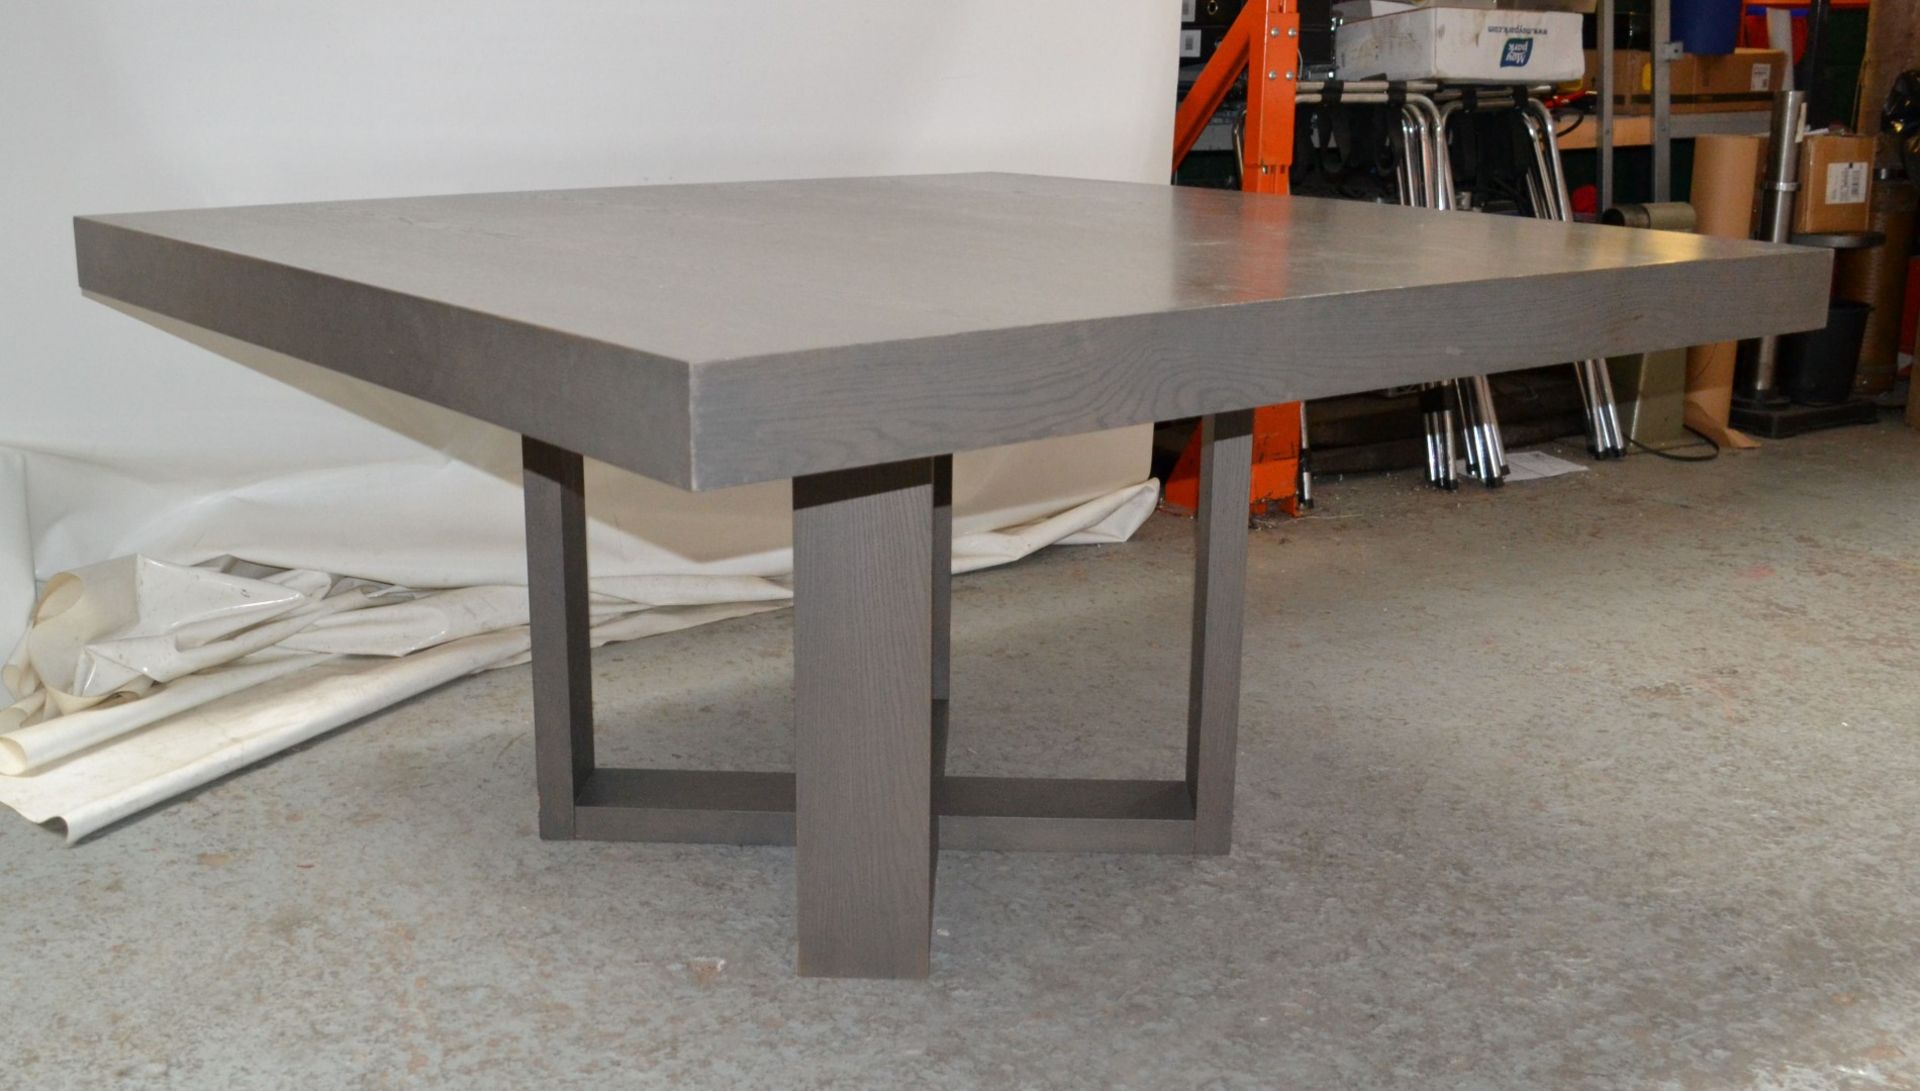 1 x Large Square Wooden Dining Table in a Grey Oak Coloured Finish - CL314 - Location: Altrincham - Image 8 of 10